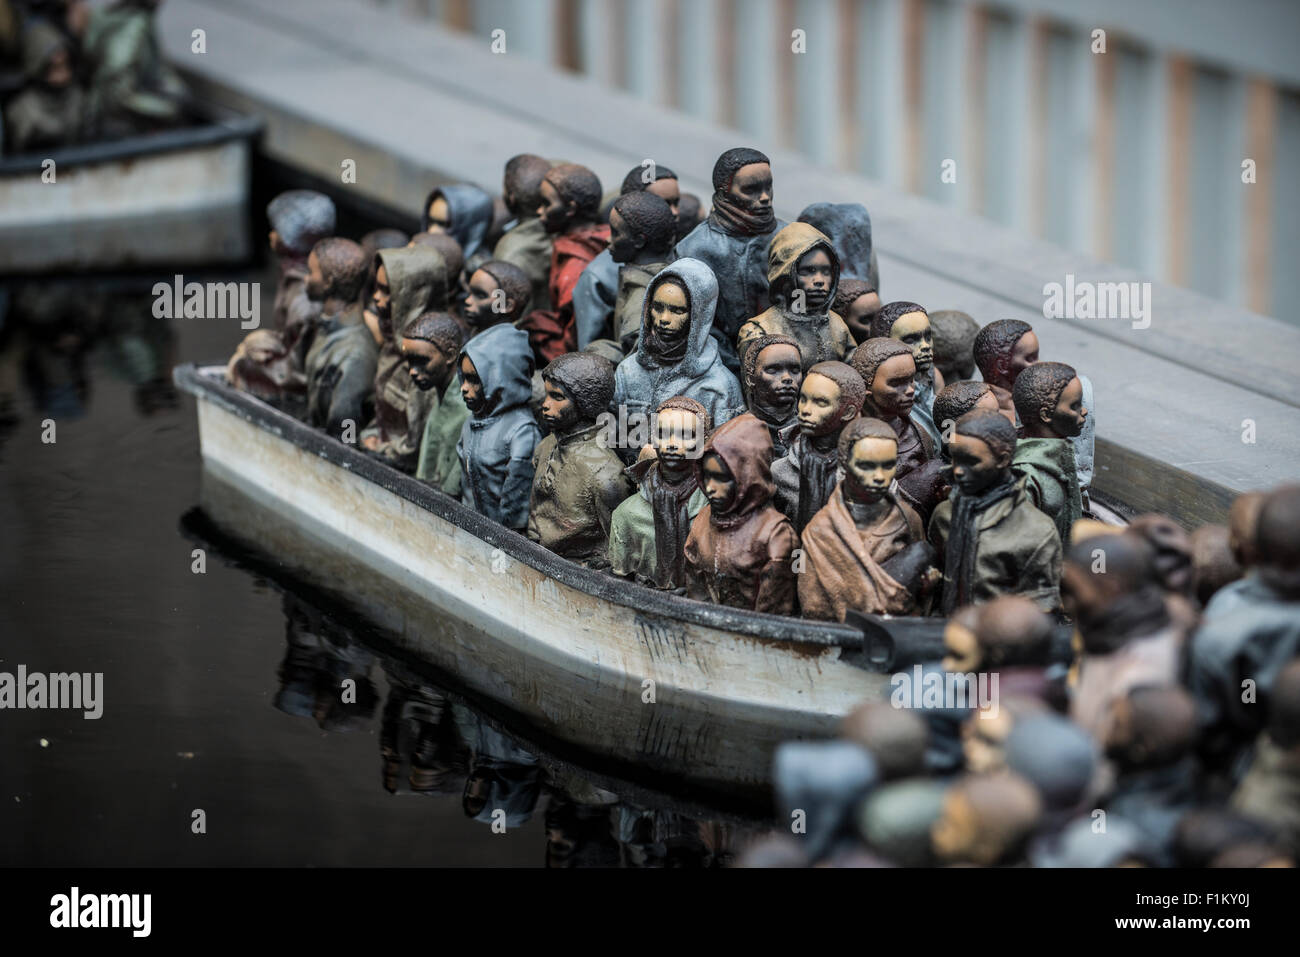 Street artist Banksy's Dismaland in Weston-Super-Mare. Pictured is piece featuring radio controlled boats packed with migrants. Stock Photo